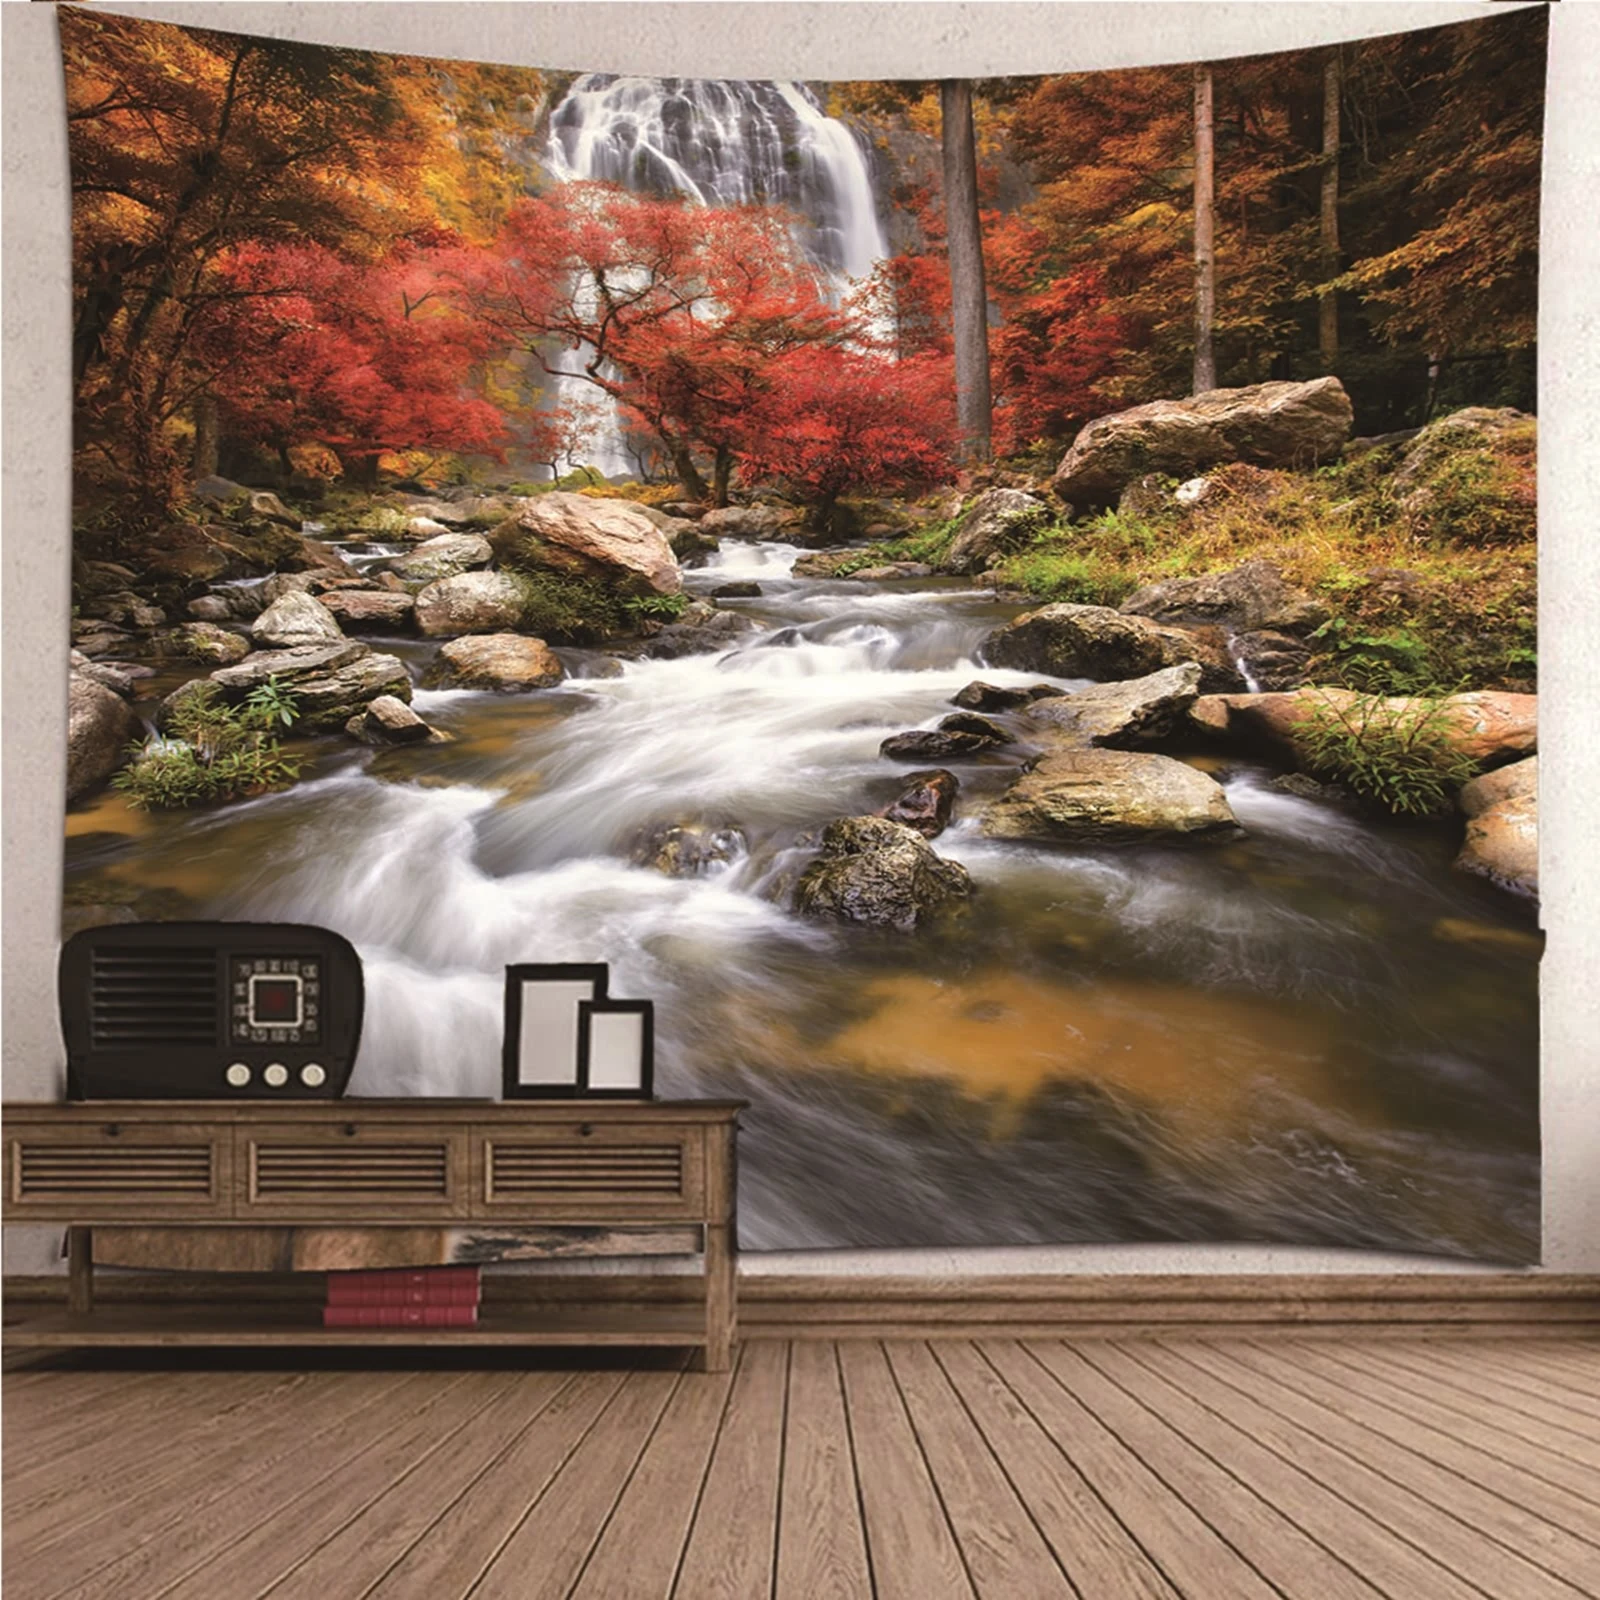 

Long Tapestry Wall Art Extra Large natural scenery Waterfall & Maple Tree in the Forest Wall Hanging Blanket Dorm Art Decor